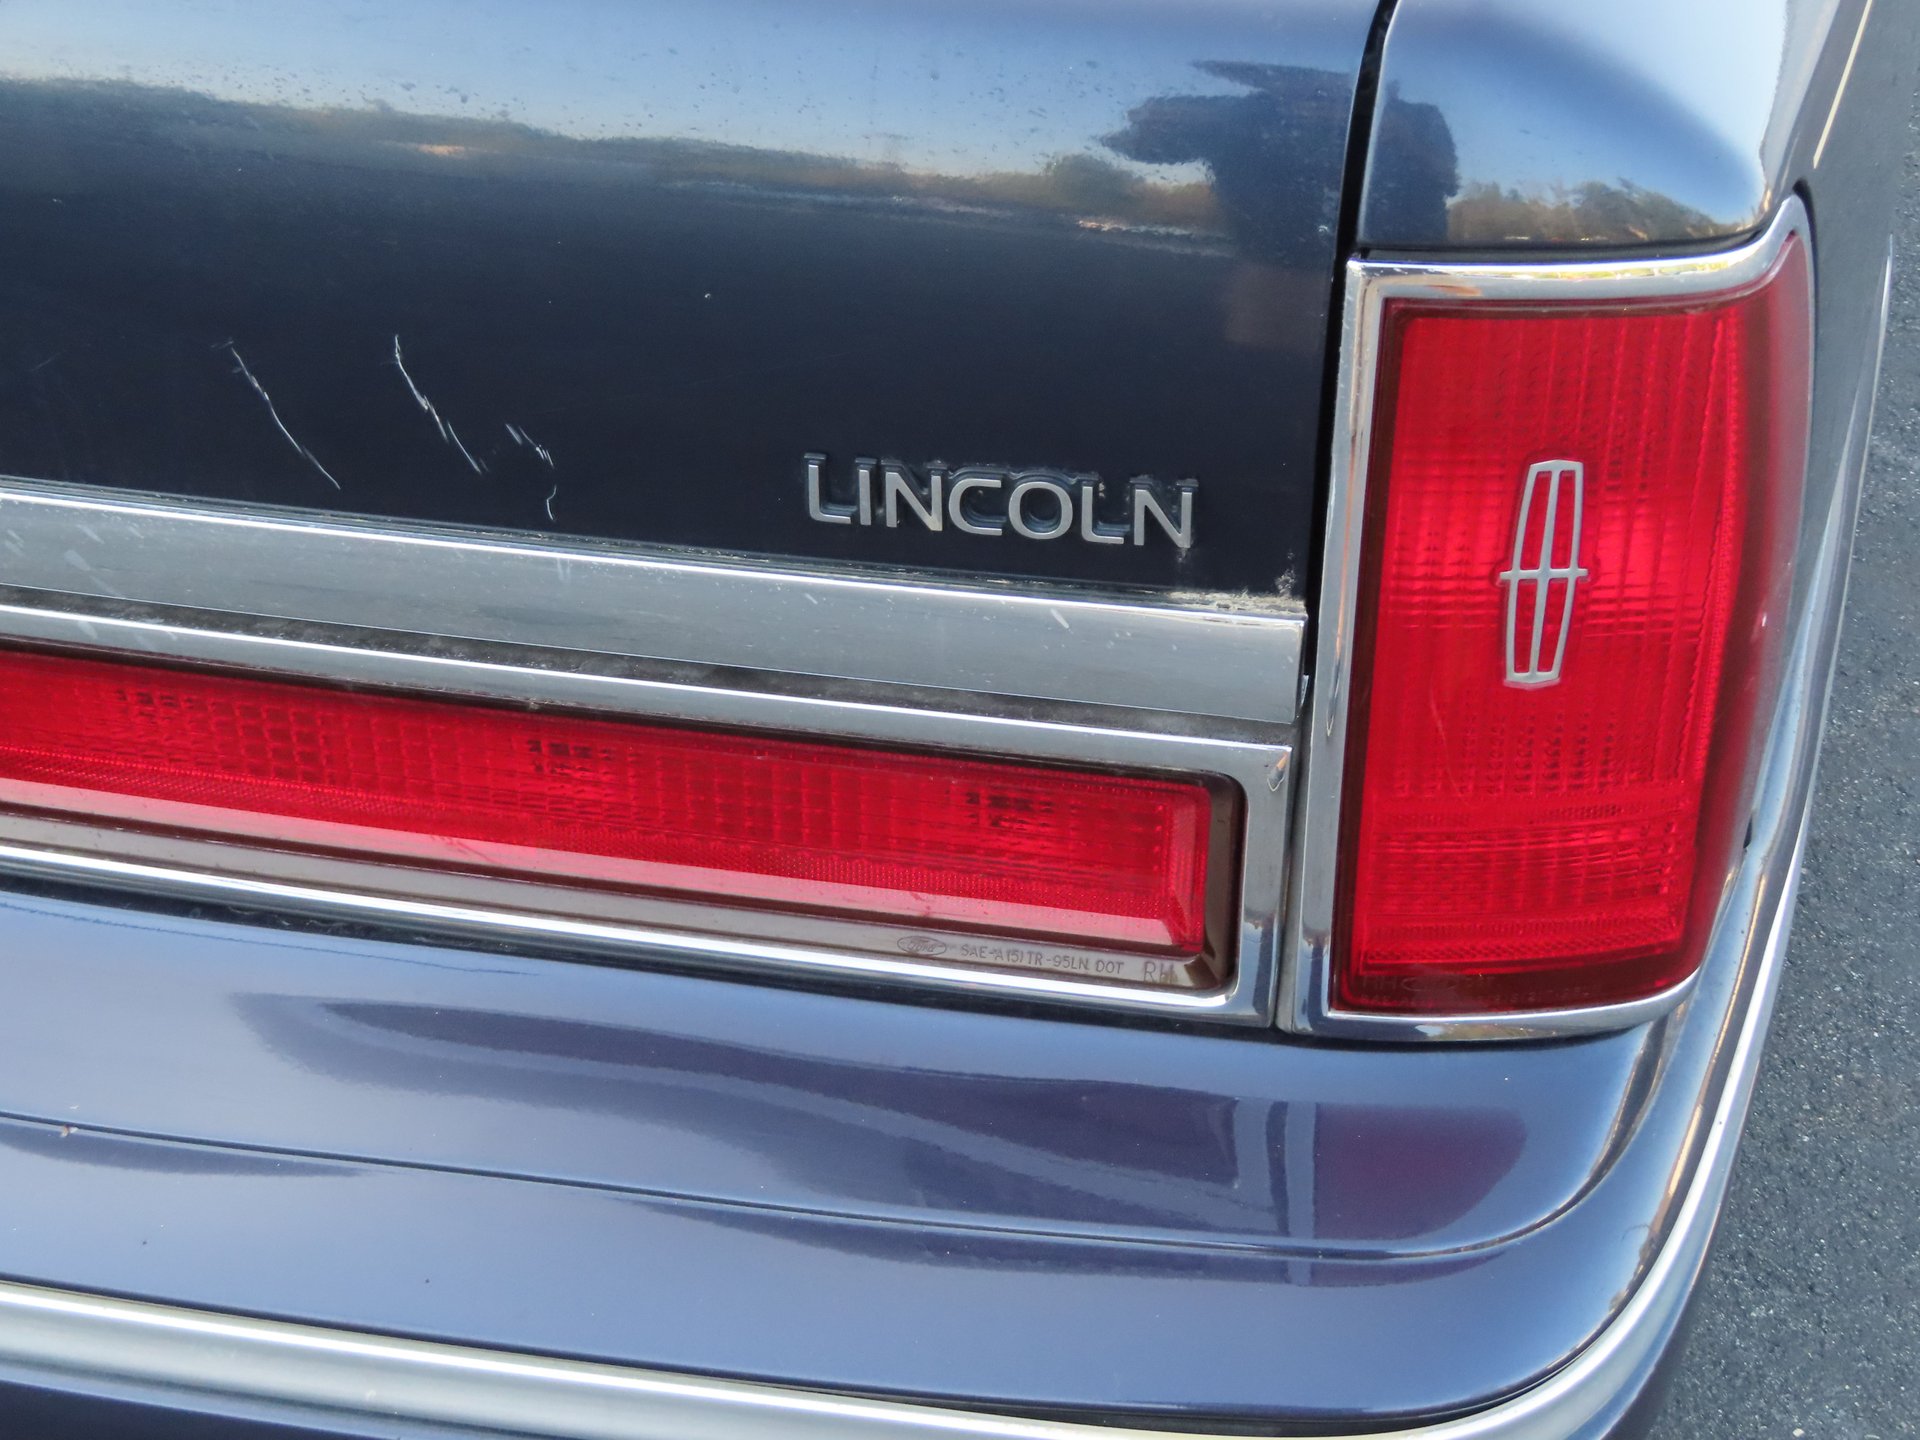 For Sale 1996 Lincoln Town Car